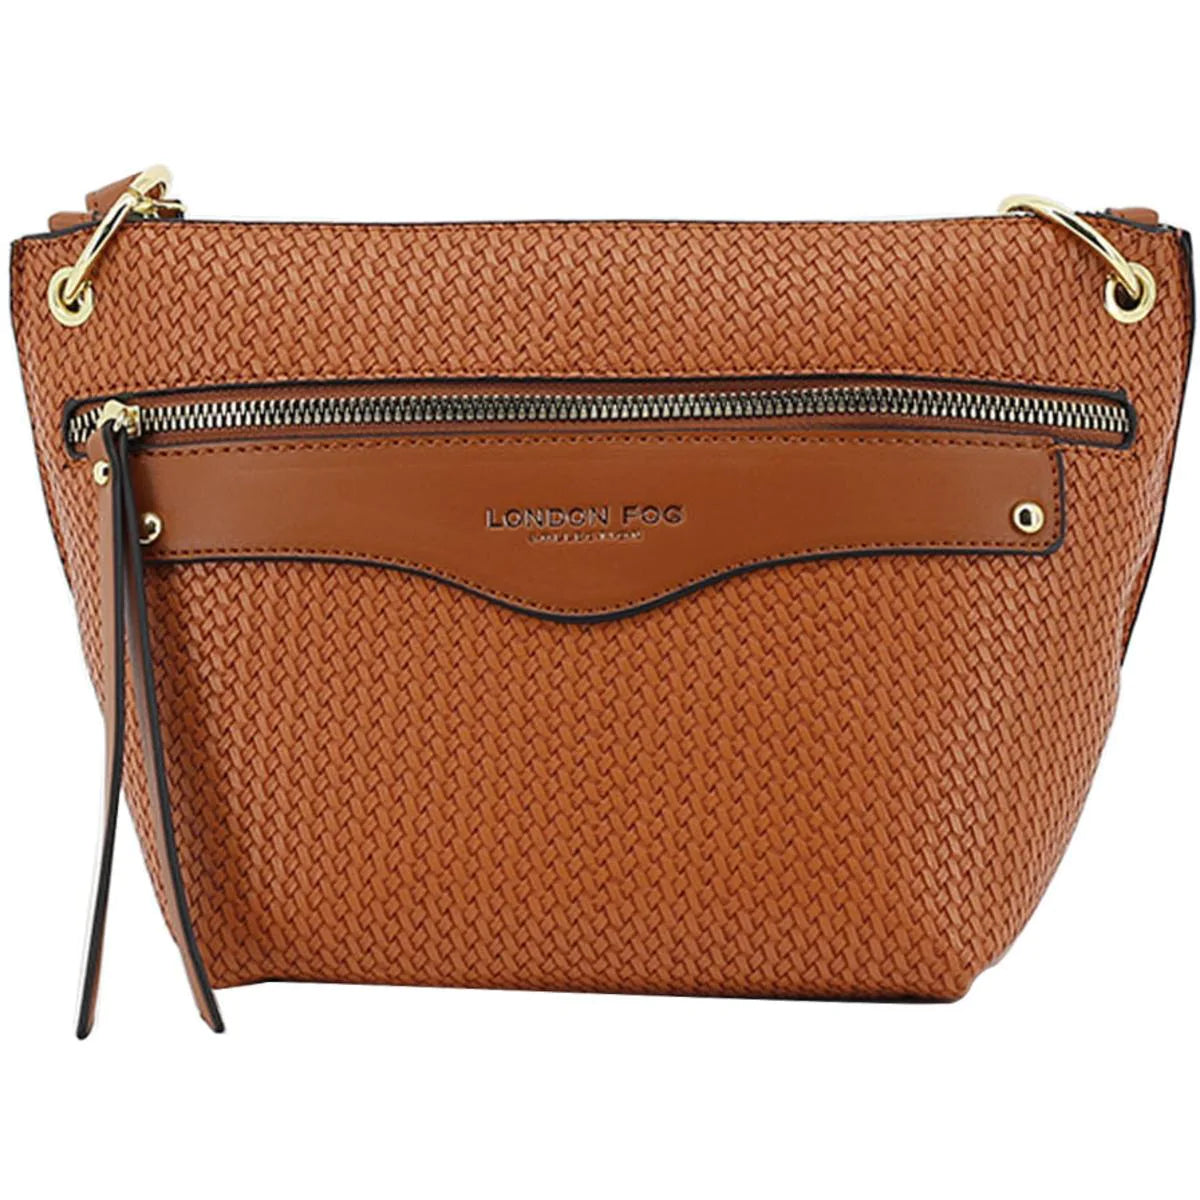 LONDON FOG Aphina Faux Leather Crossbody Bag in Cognac